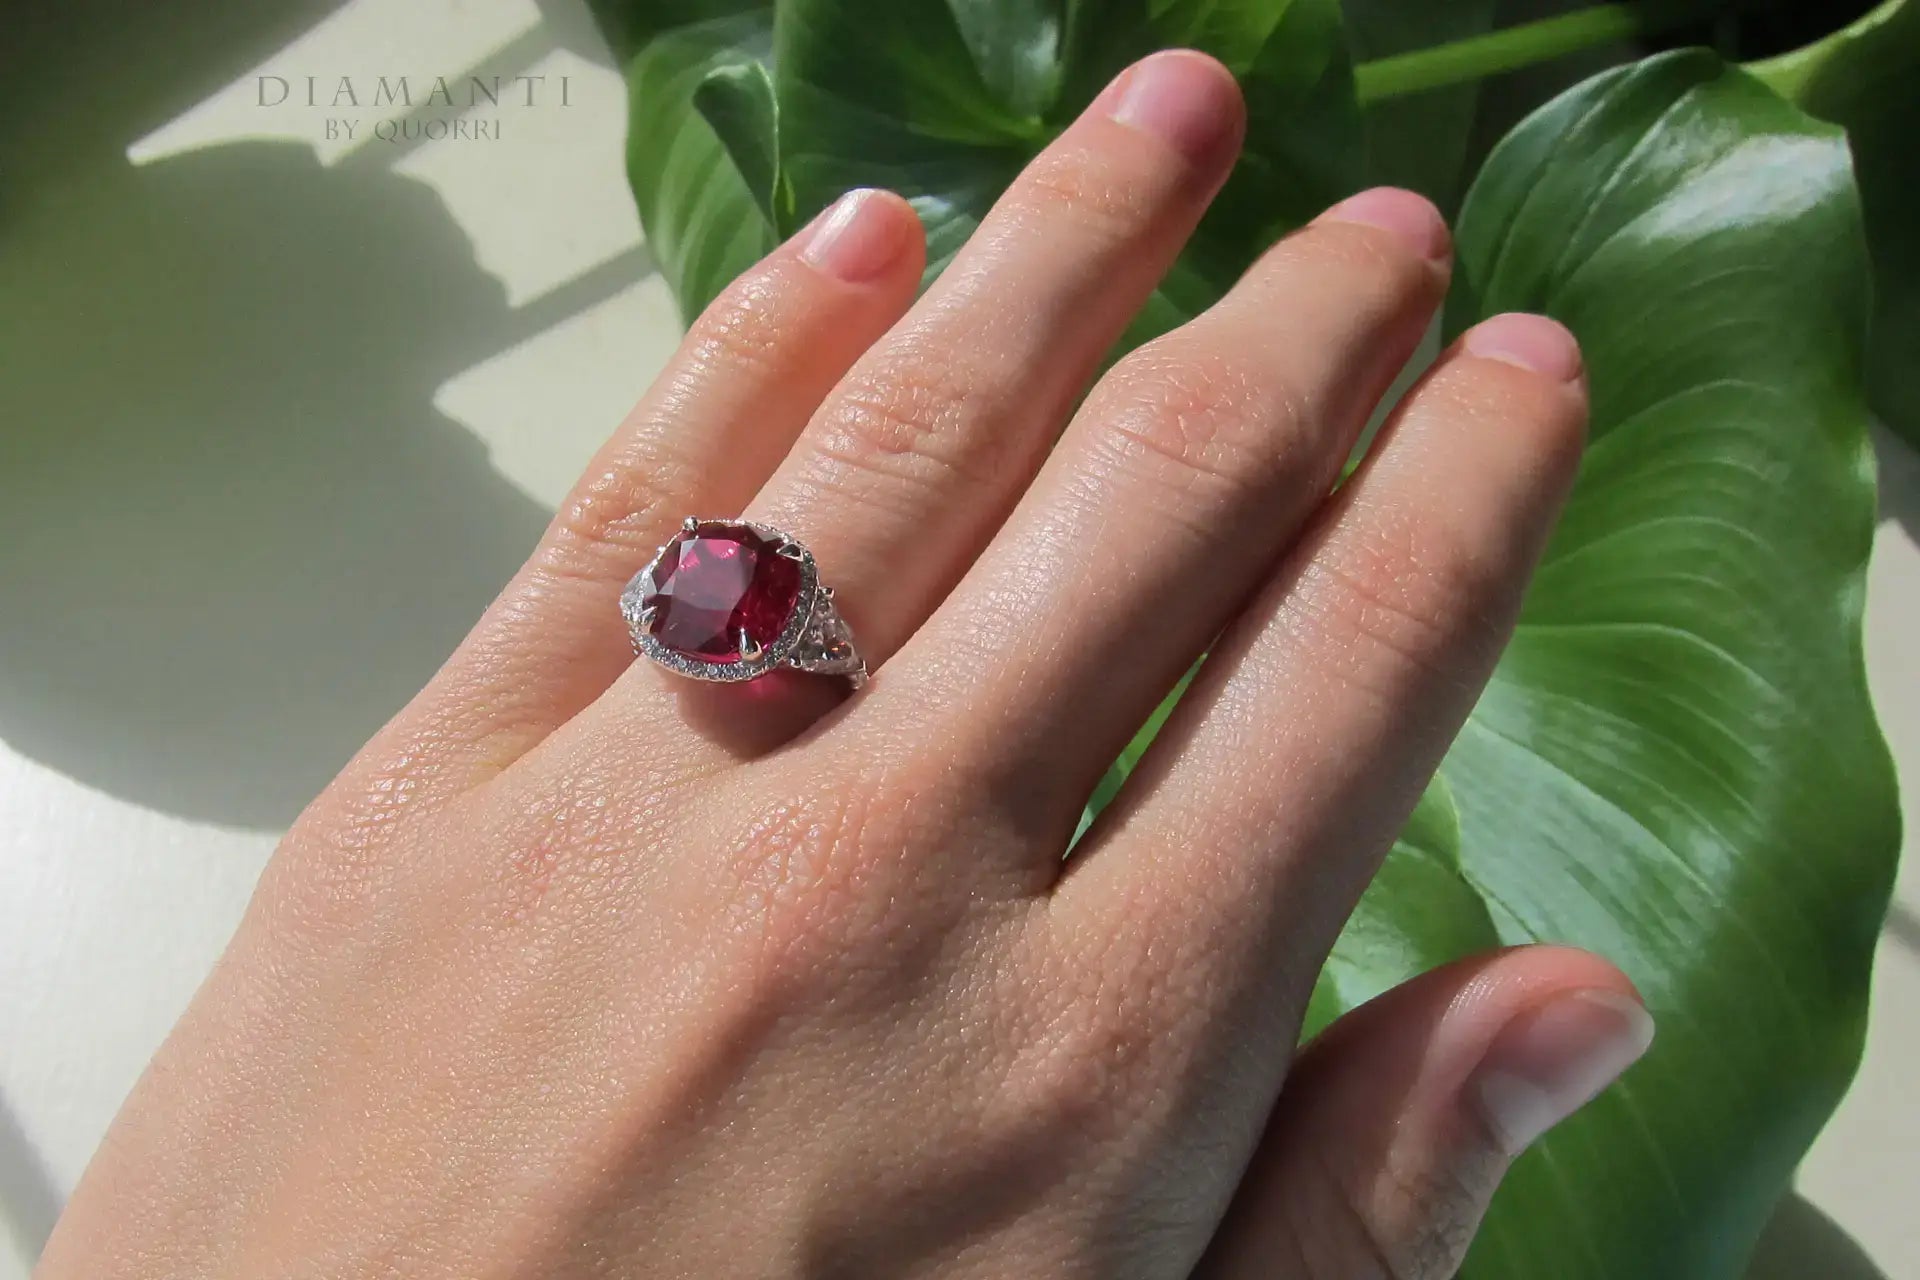 4 carat white gold claw prong halo three stone red ruby lab grown diamond engagement ring Quorri